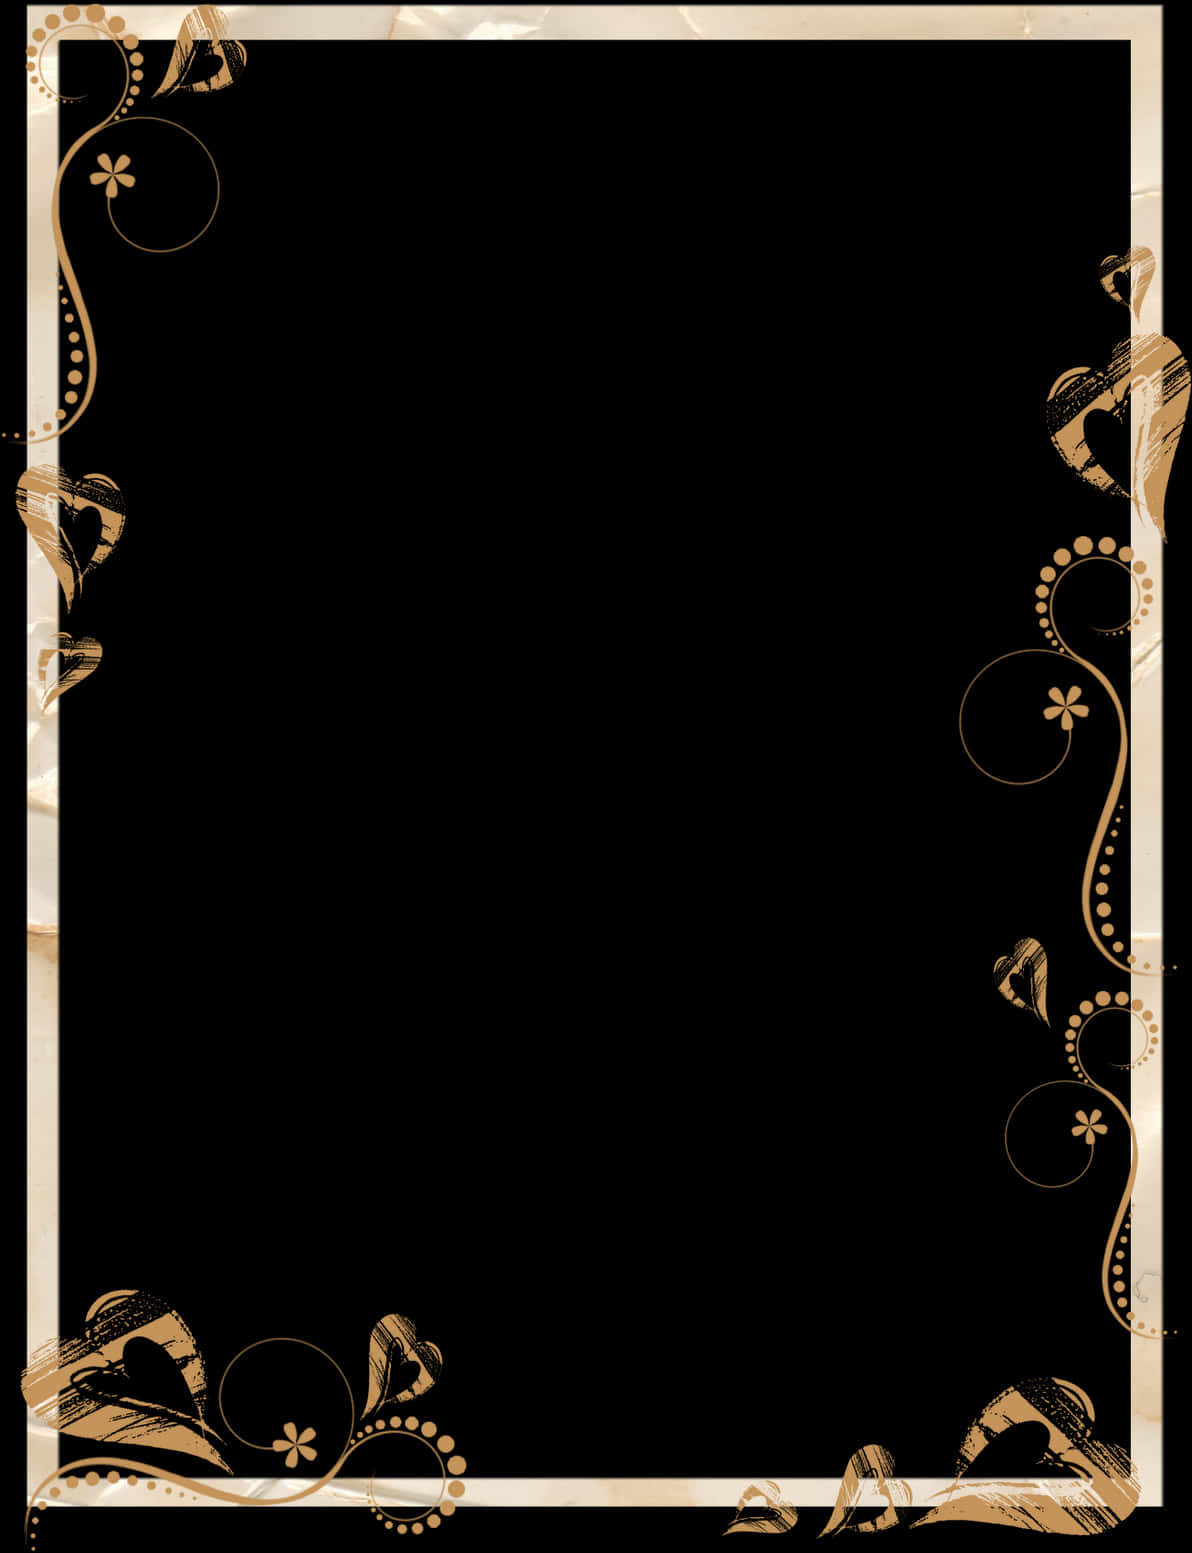 A Black And Gold Border With Gold Swirls And Flowers